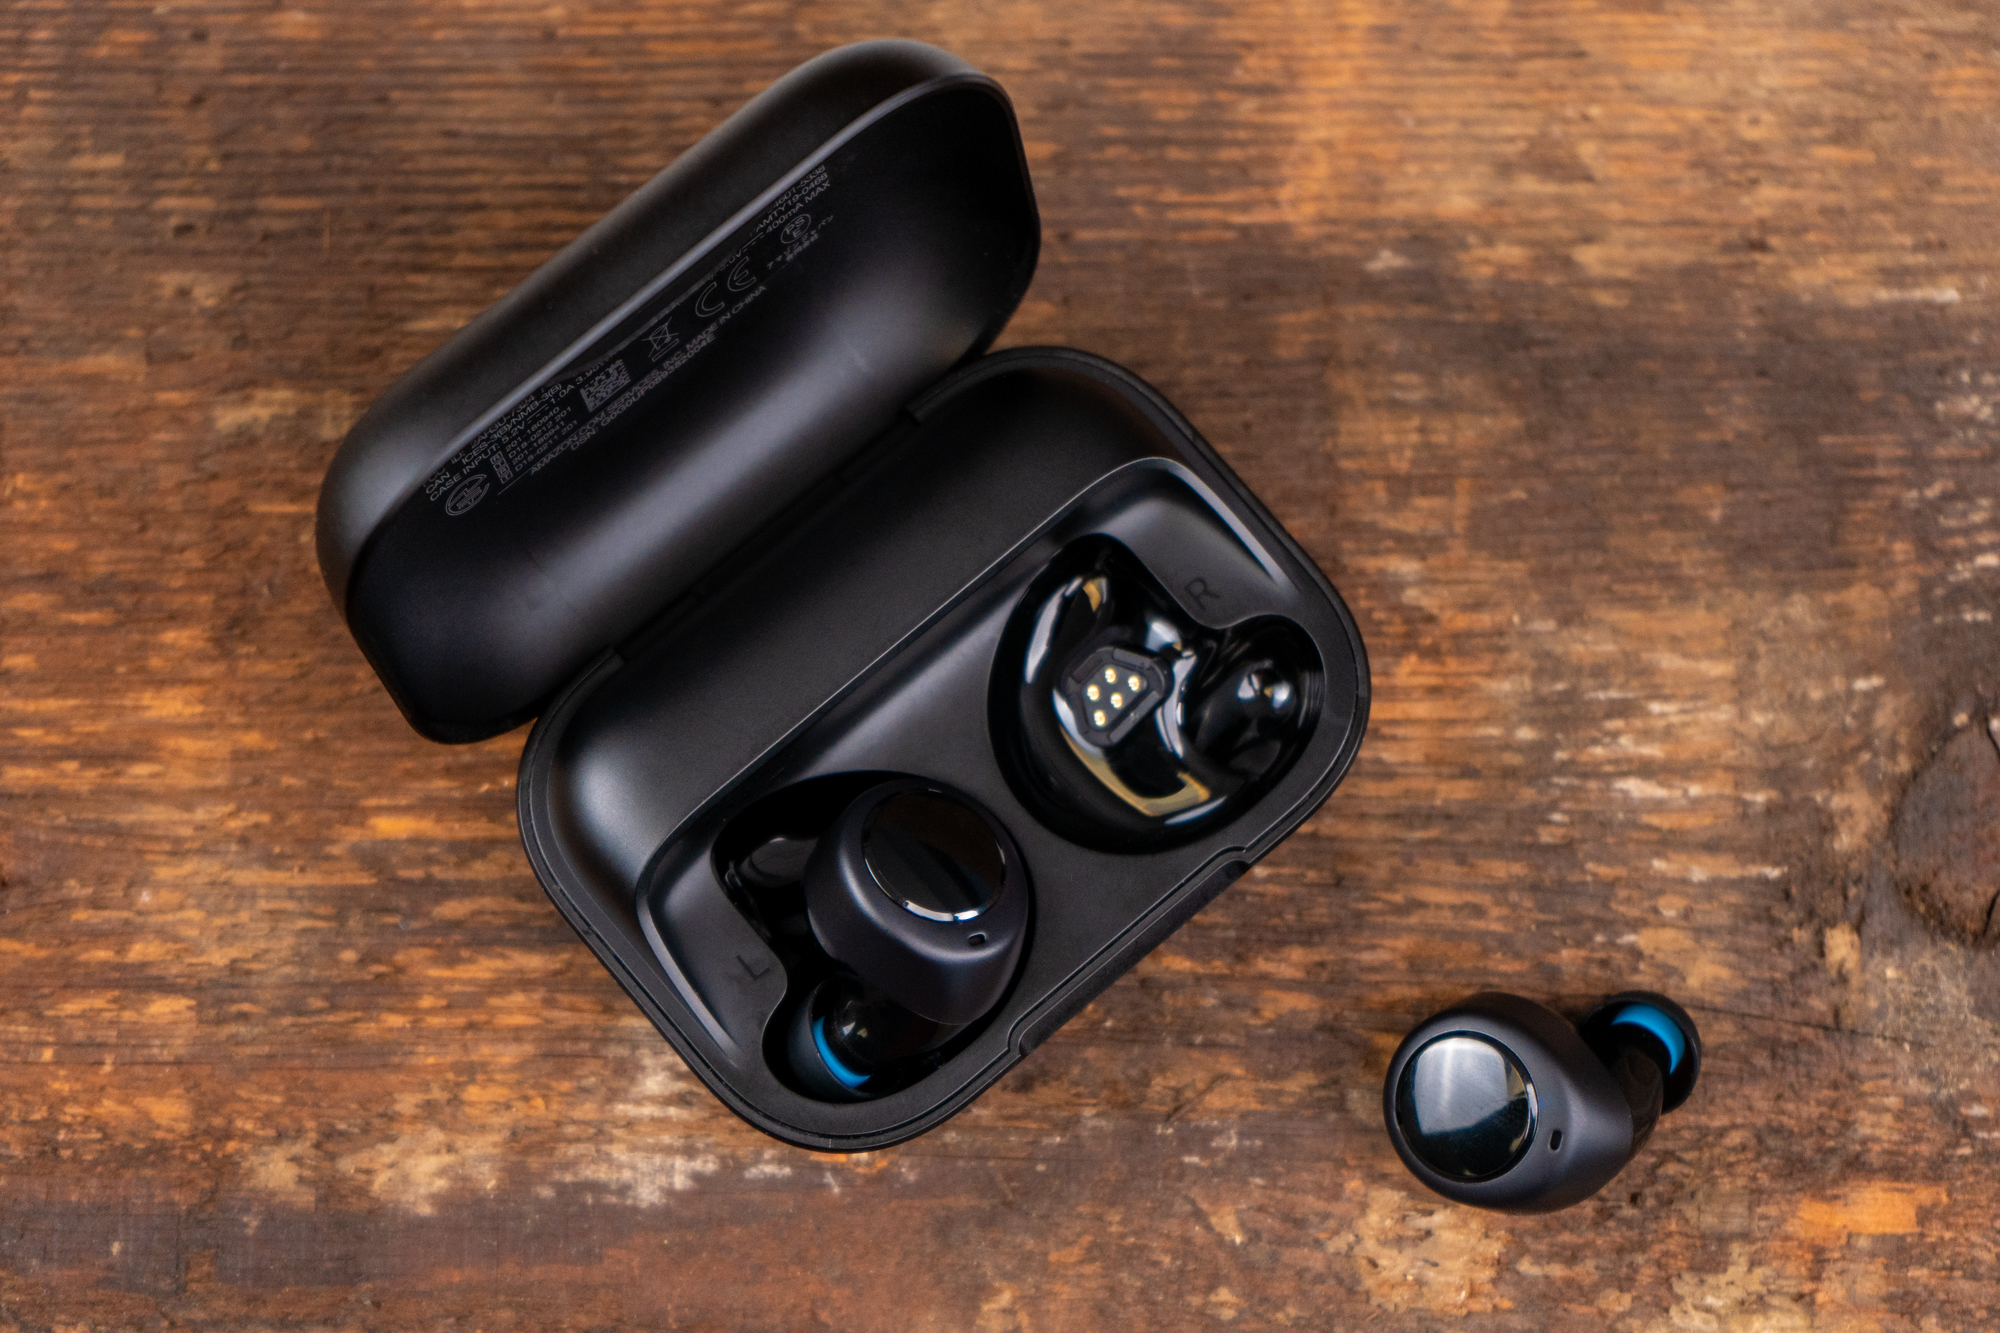 Echo Buds Review: Better and Cheaper Than AirPods